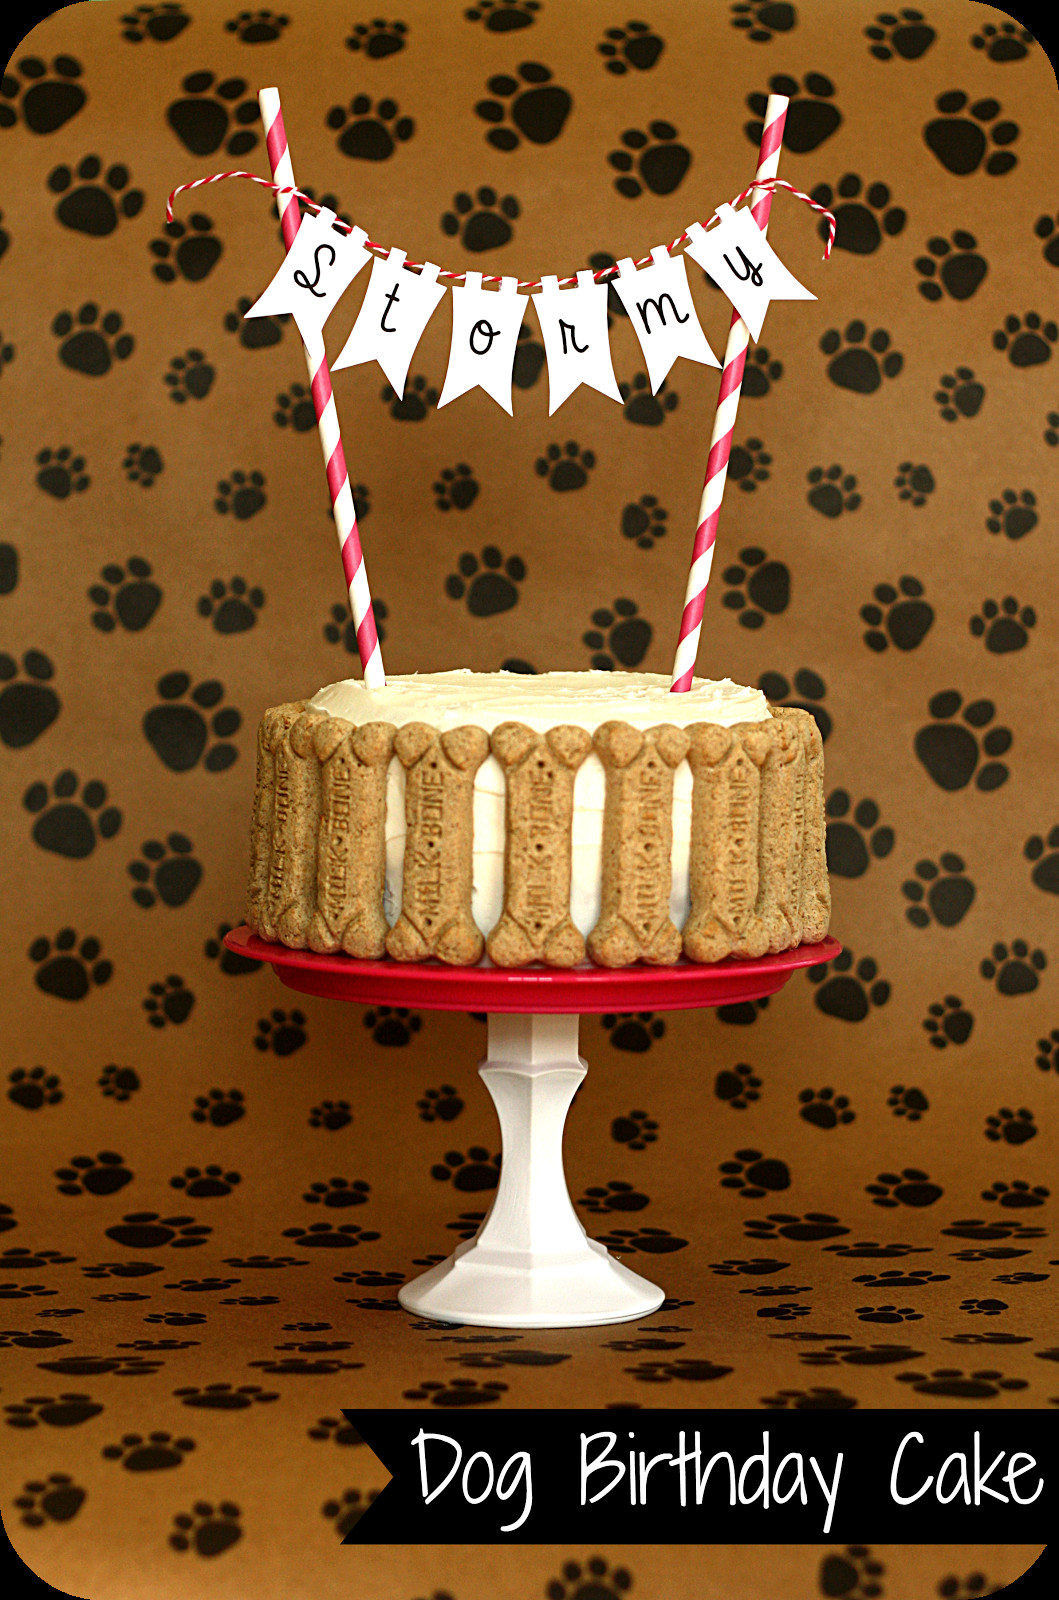 Birthday Cake Recipes For Dogs
 Keeping My Cents ¢¢¢ Dog Birthday